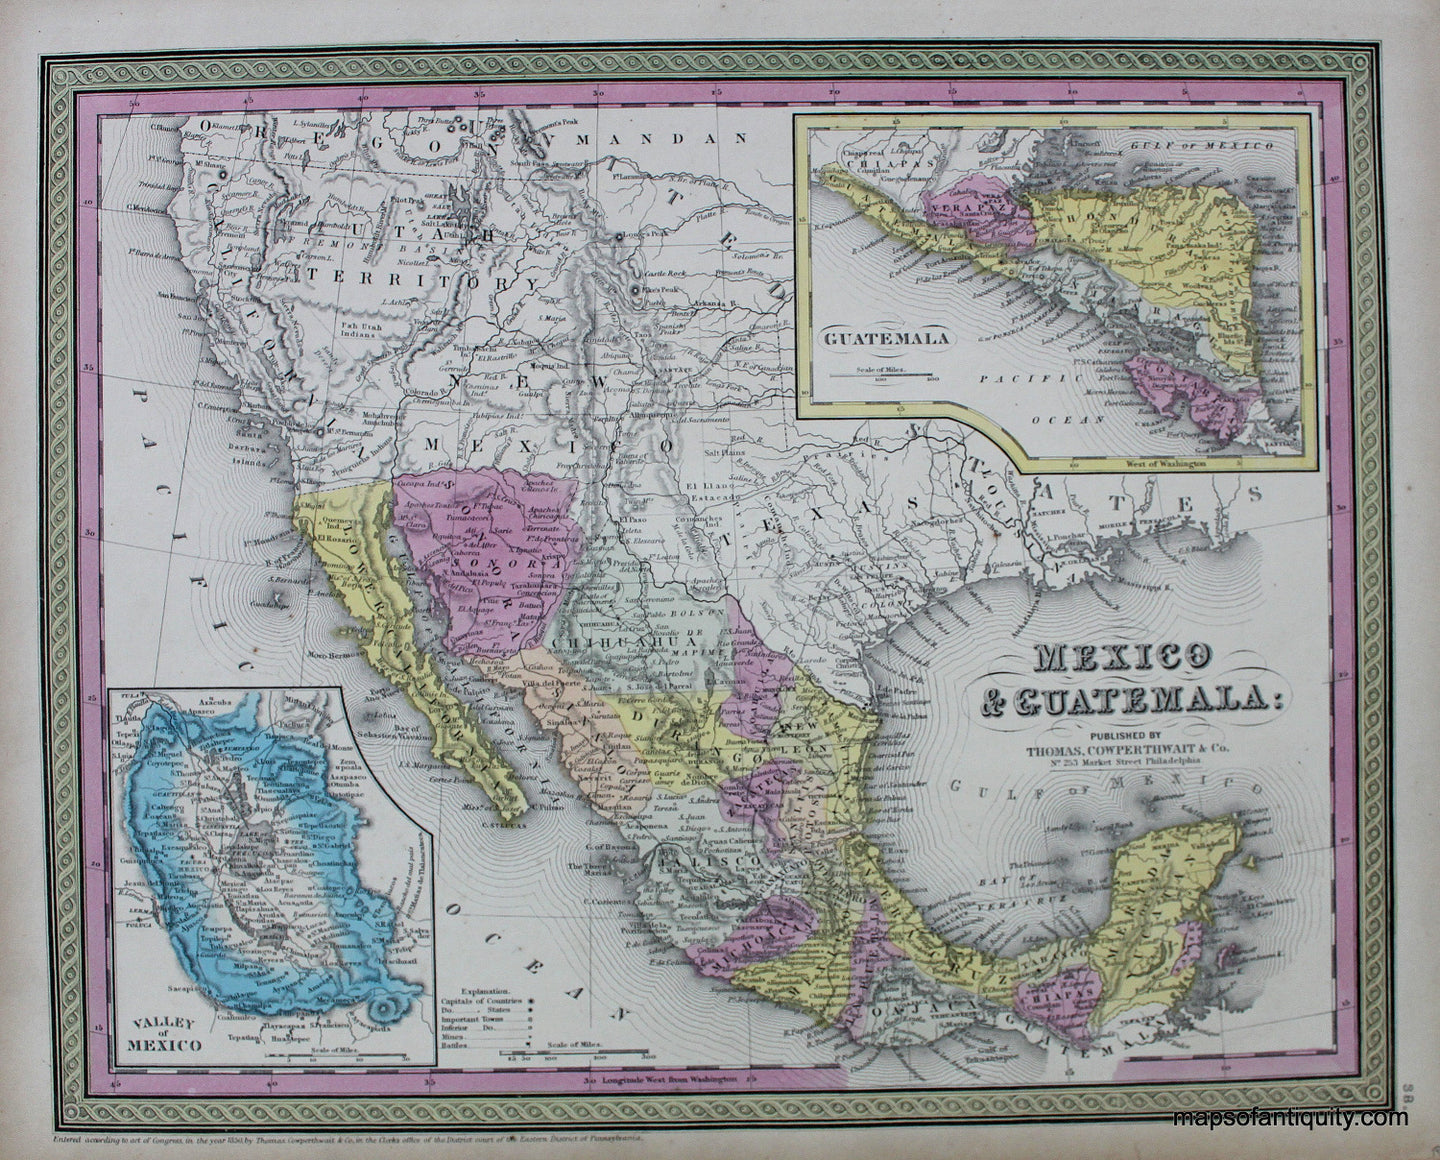 Antique-Hand-Colored-Map-Mexico-&-Guatemala.-Central-America-and-Caribbean--1850-Mitchell/Cowperthwait-Desilver-&-Butler-Maps-Of-Antiquity